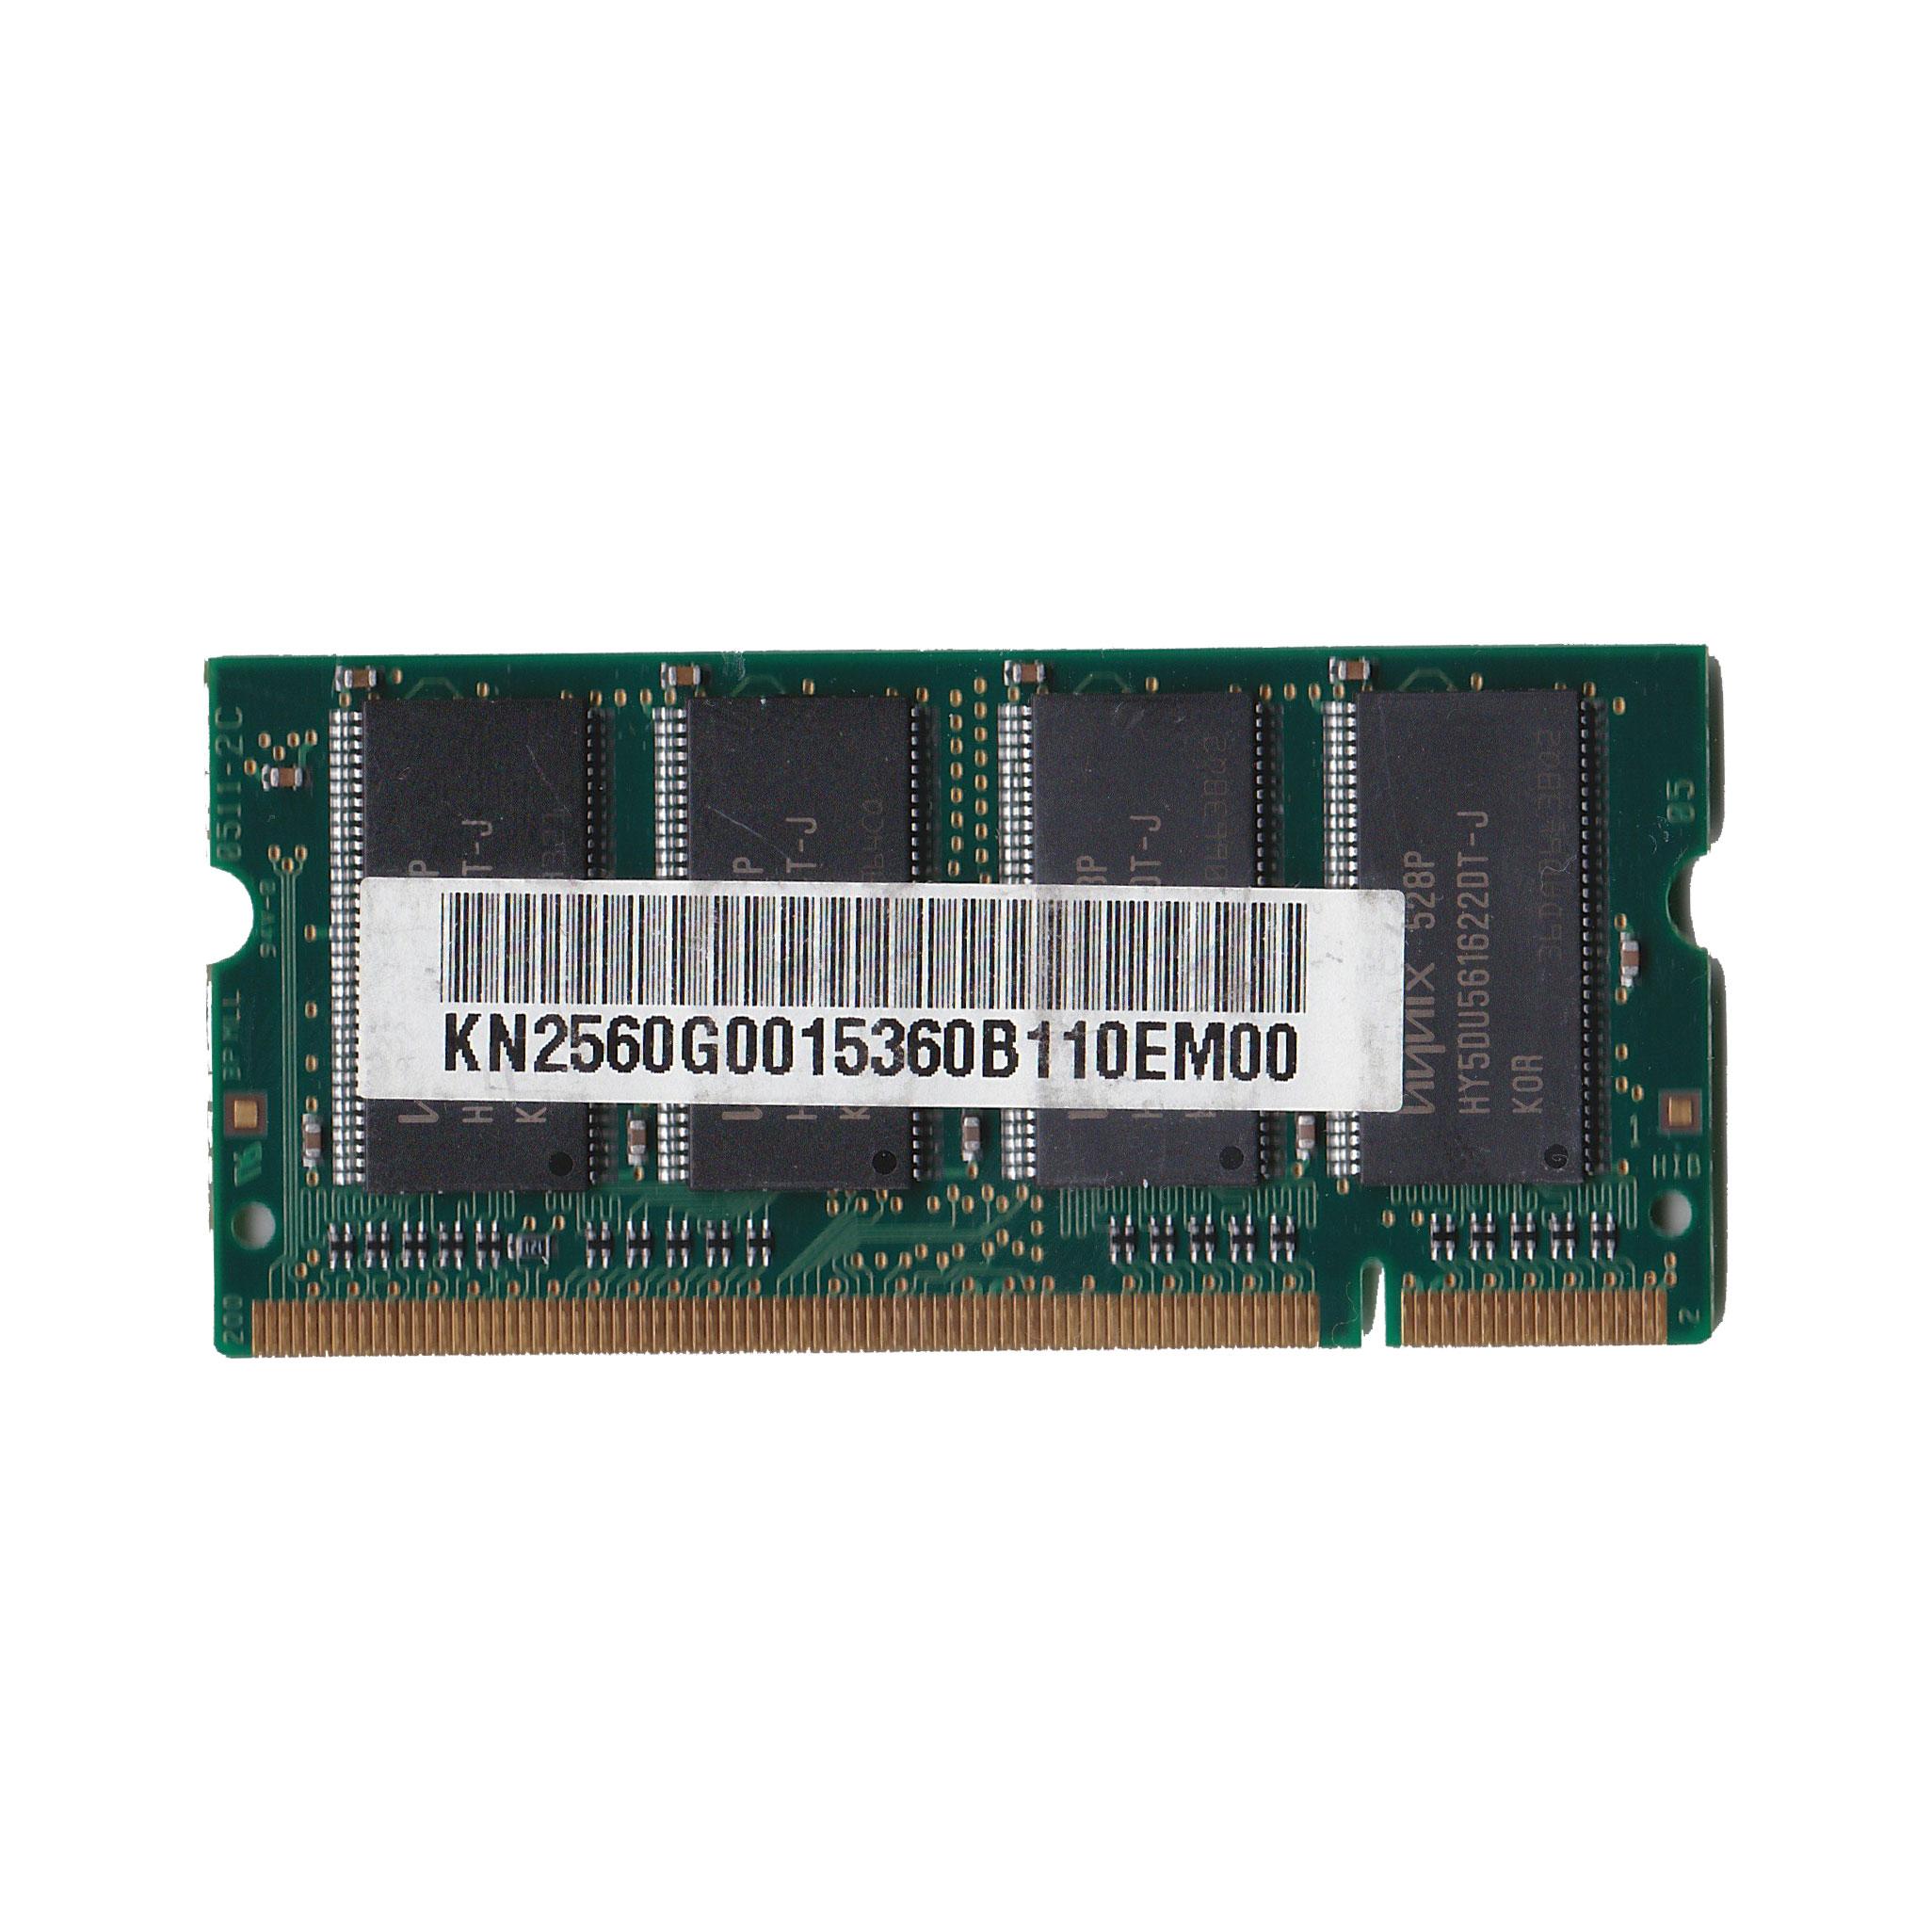 Untested HYNIX PC2700S-25330 256MB DDR-333MHz CL2.5 Laptop Memory Module - Priced to Clear